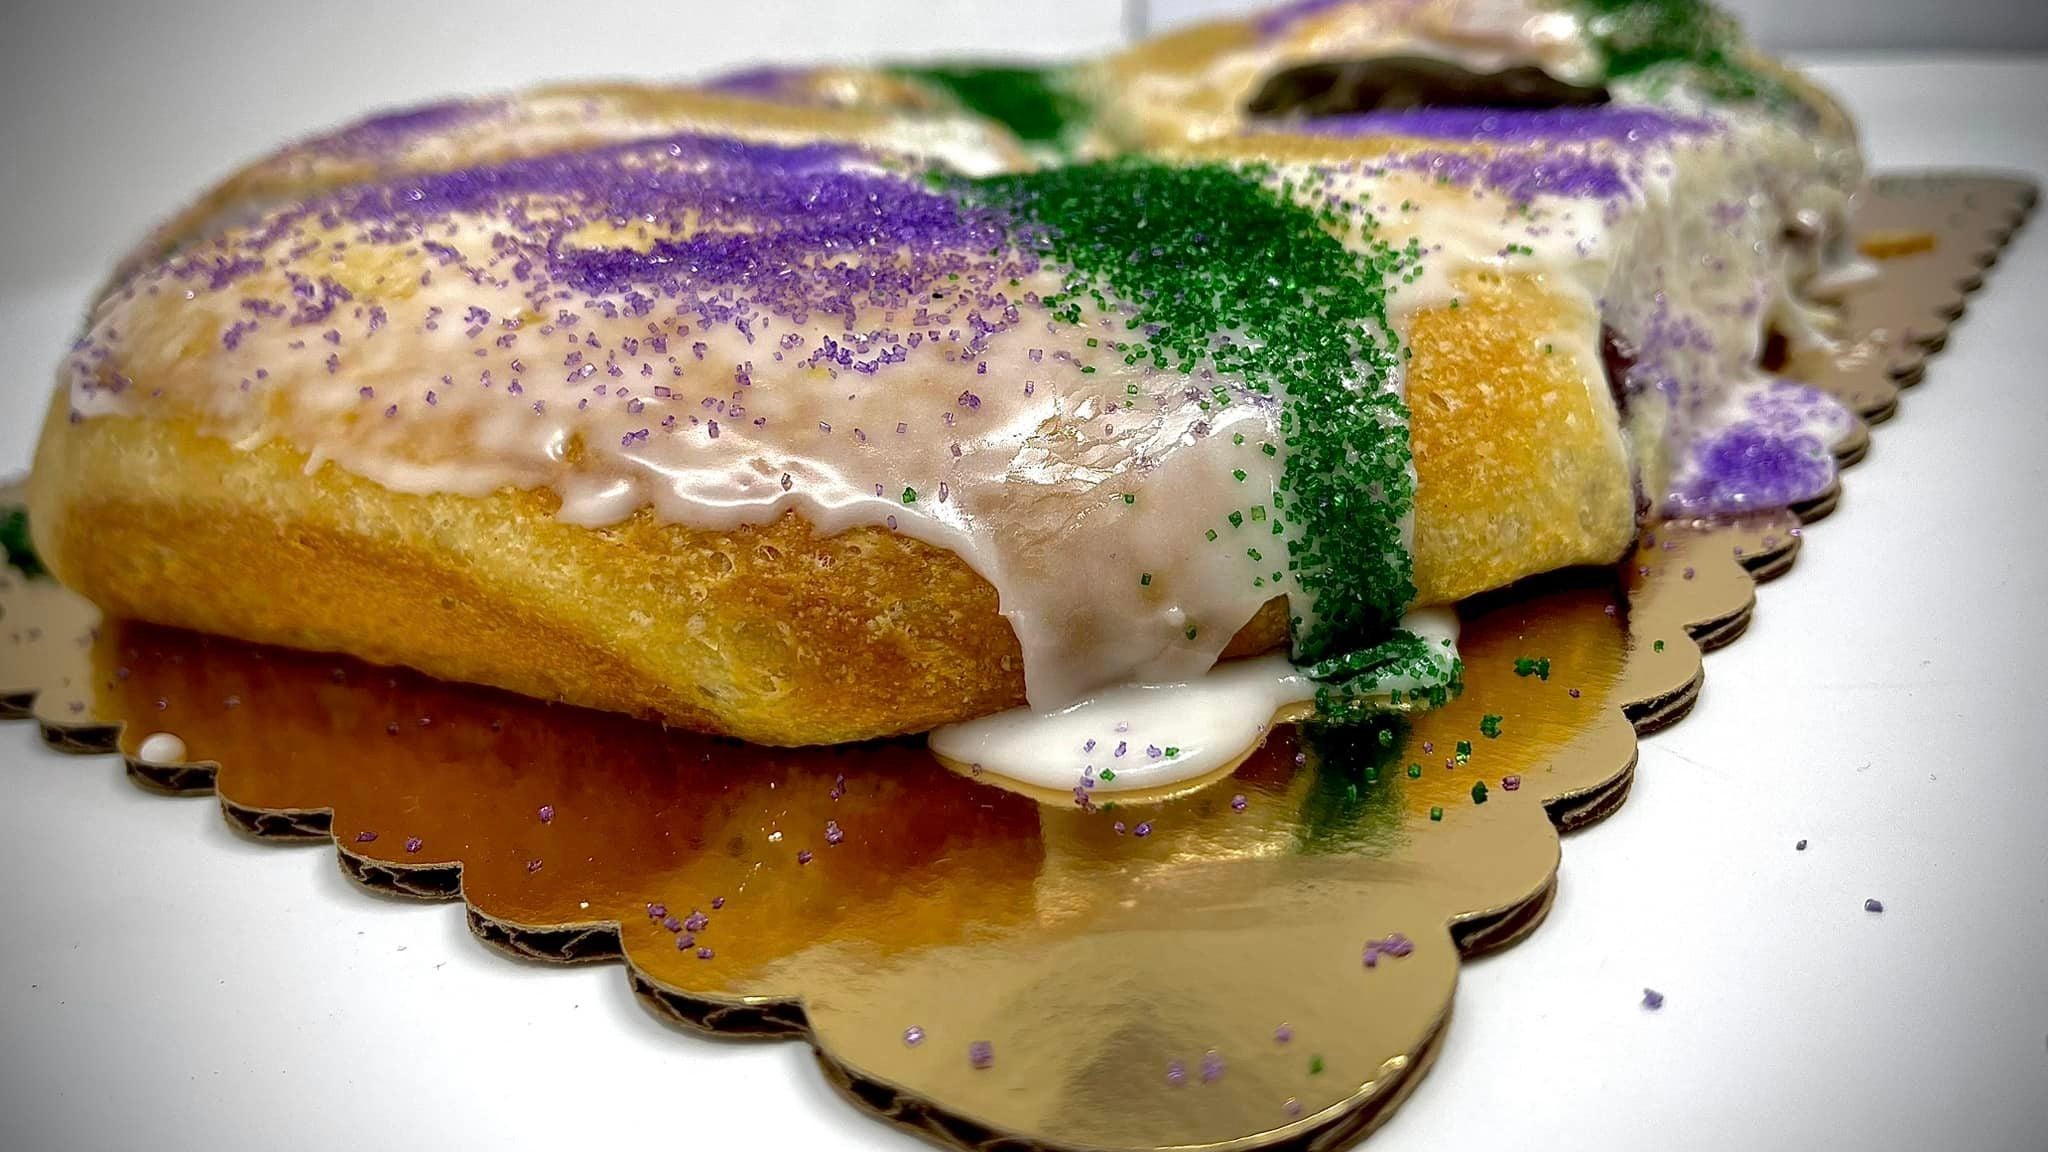 Caluda's King Cake - What could be better than Praline King Cake? Maple  Bacon Praline of course! Because bacon makes everything better! 🥓👑  Available Tomorrow 1/19 504-218-5655 1636 River Oaks Rd W | Facebook